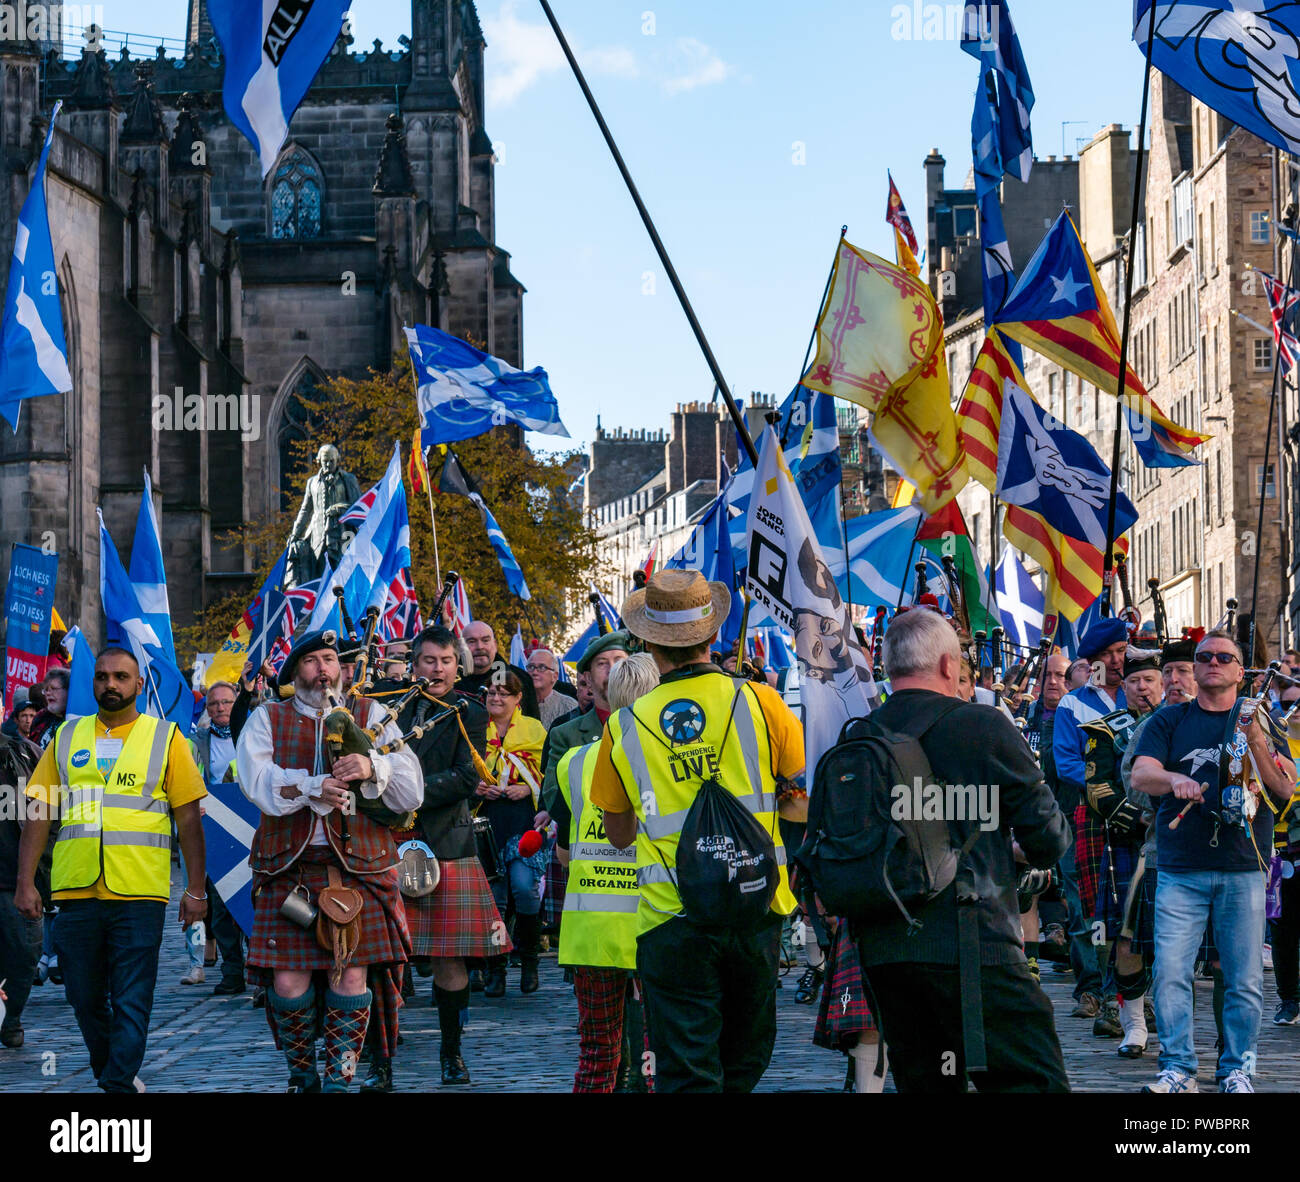 People marching and waving national flags at All Under One Banner AUOB Scottish Independence march 2018, Royal Mile, Edinburgh, Scotland, UK Stock Photo